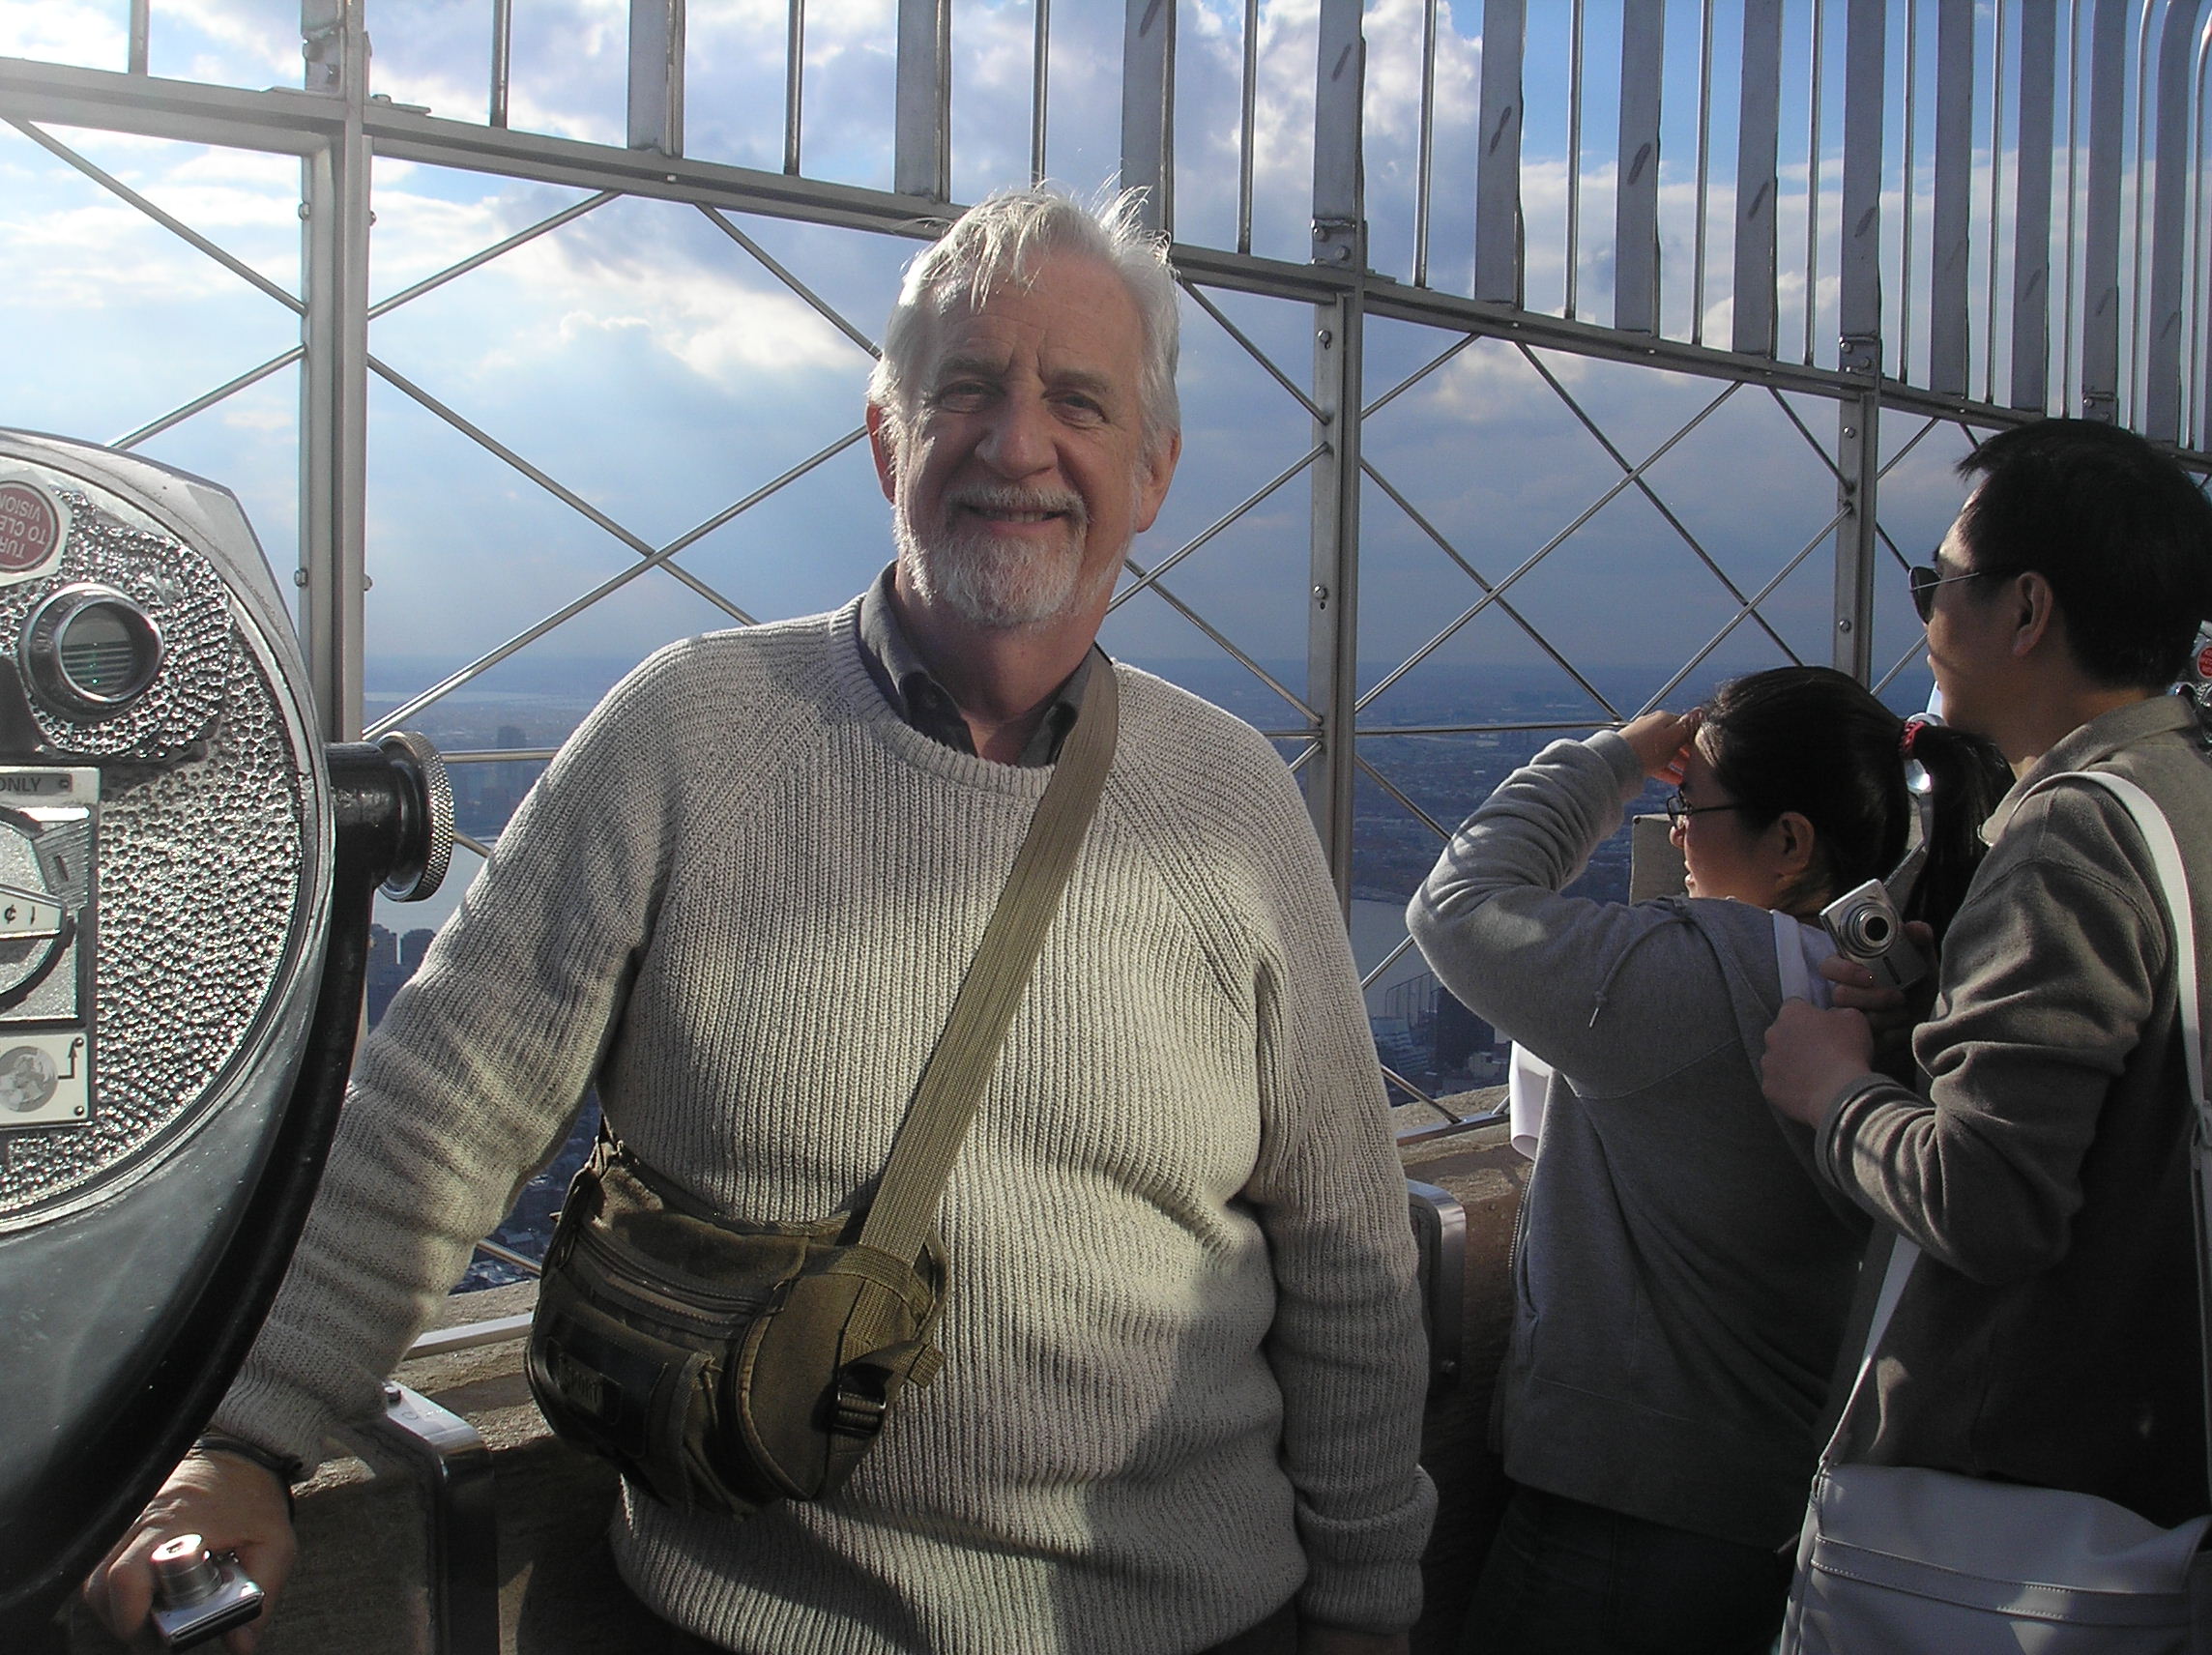 On top of the world (or, at least, the Empire StateBuilding after the launch of my novel in New York!